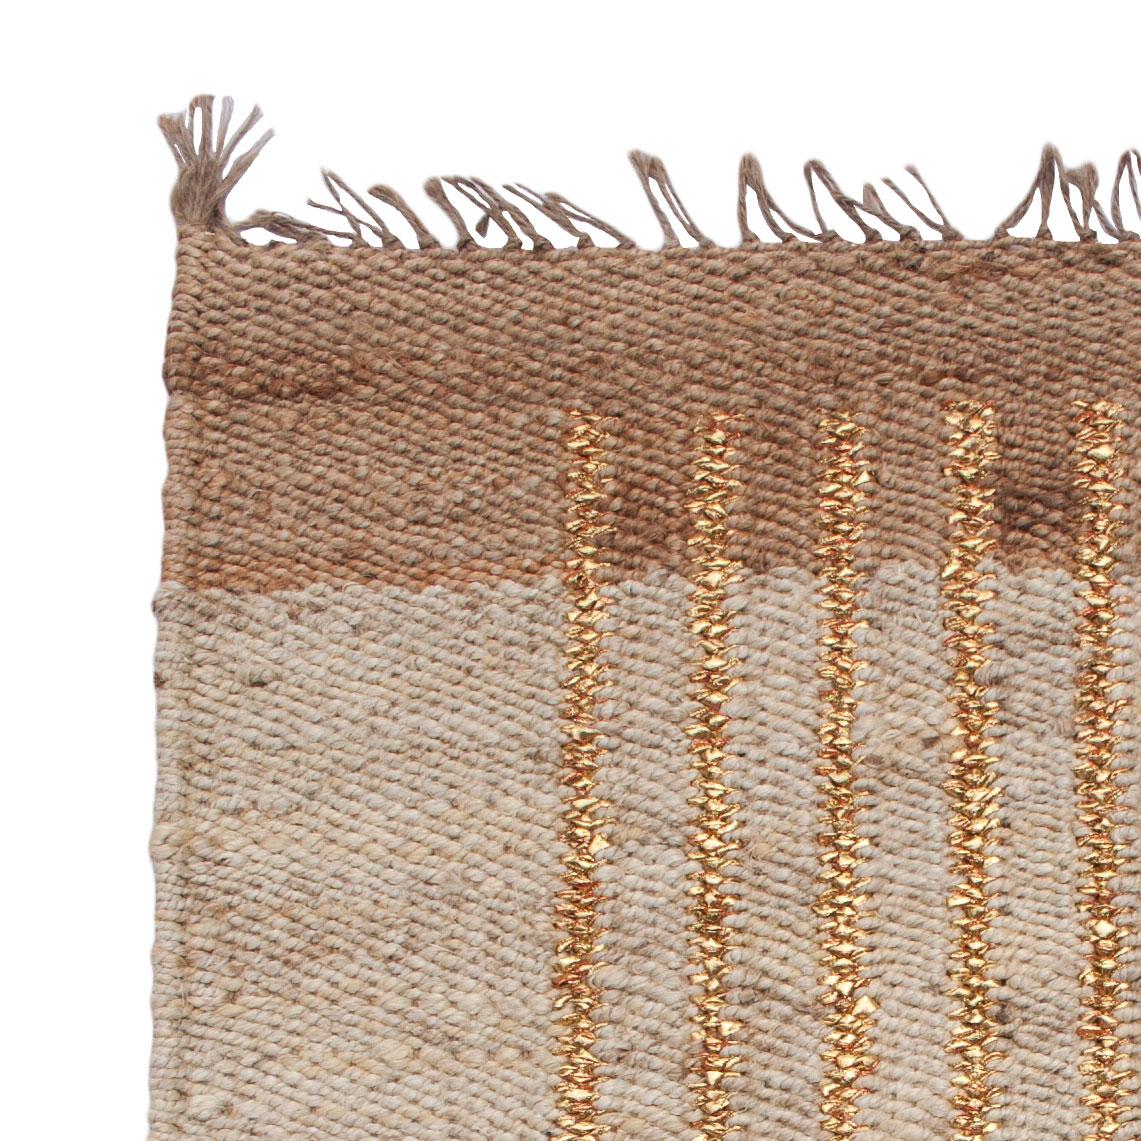 This modern area rug has been ethically hand woven in the finest jute yarns by artisans in Rajasthan, India, using a traditional weaving technique which is native to this region.

The purchase of this handcrafted rug helps to support the artisans